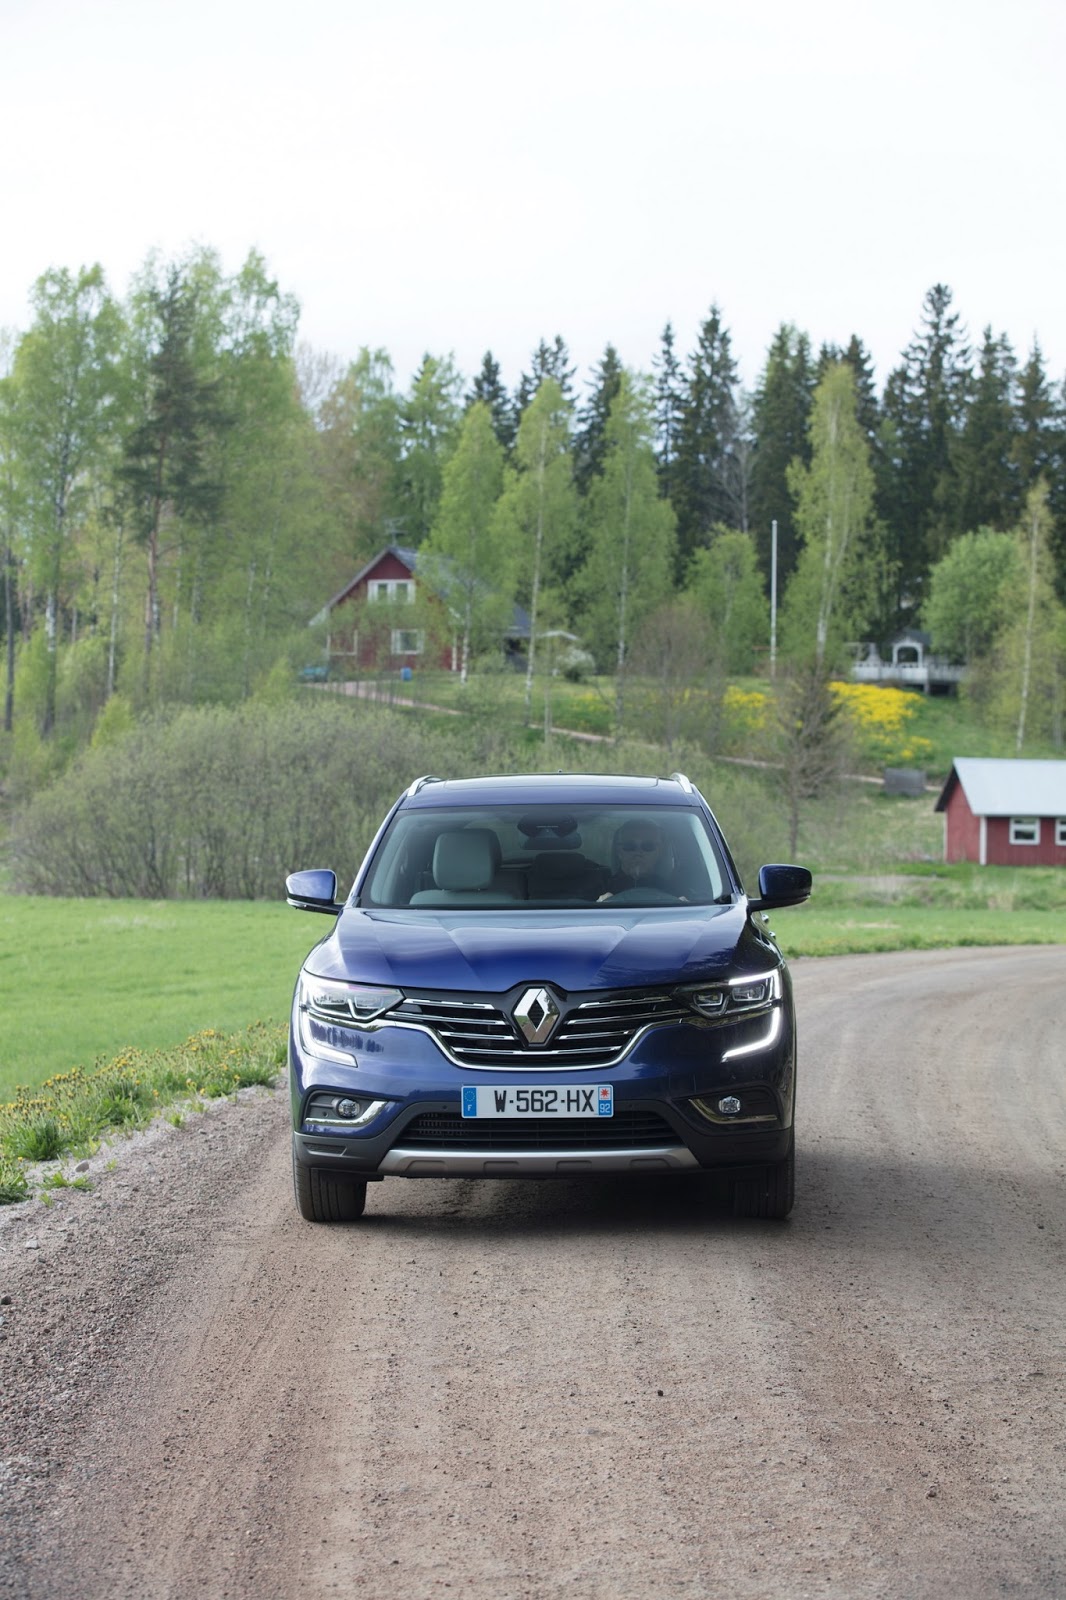 Get A Look At Renault’s New Euro Koleos SUV In 123 Images | Carscoops